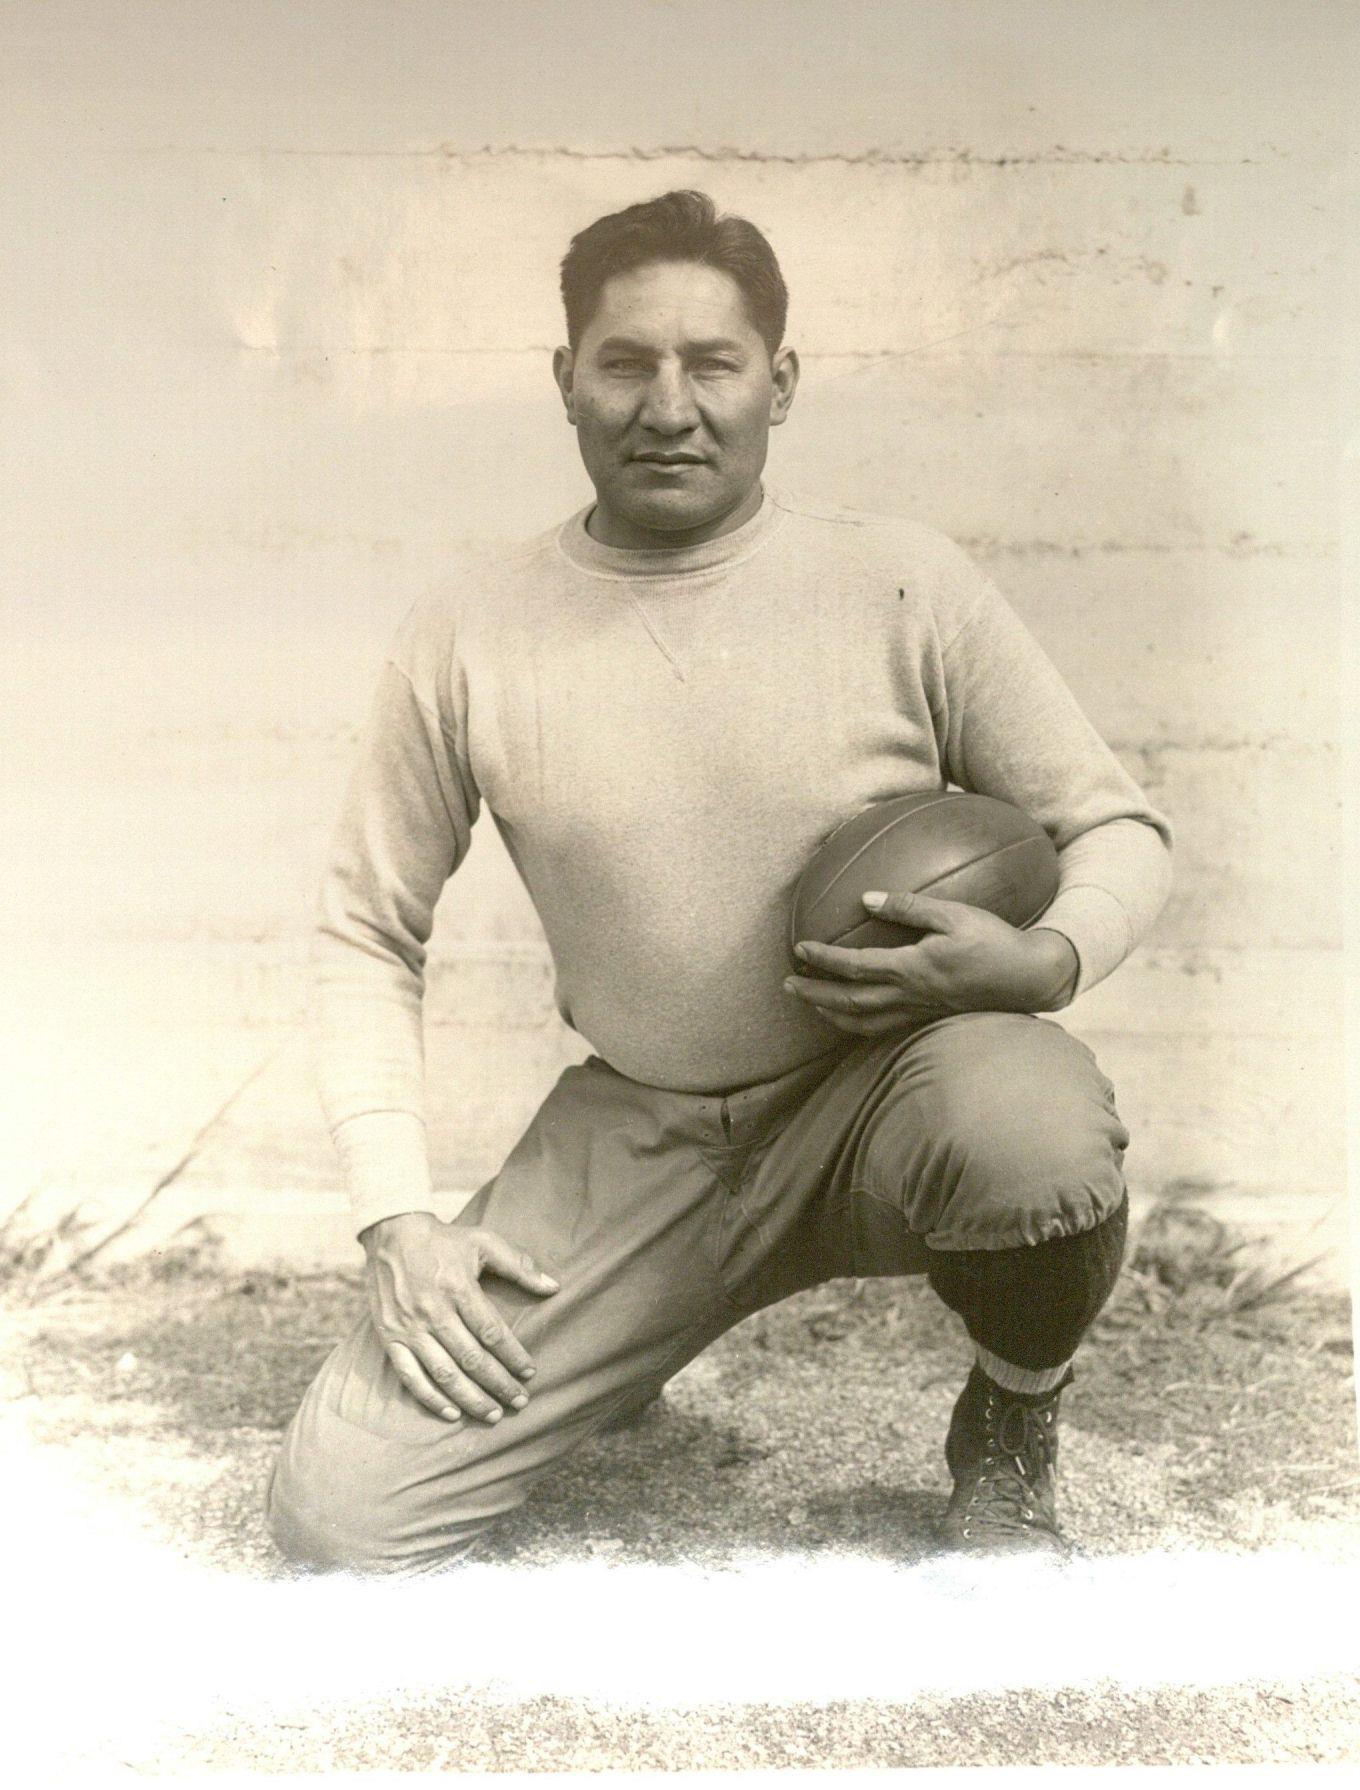 Photograph of Haskell football player John Levi and accompanying document describing his actions in a game against the Quantico Marines.